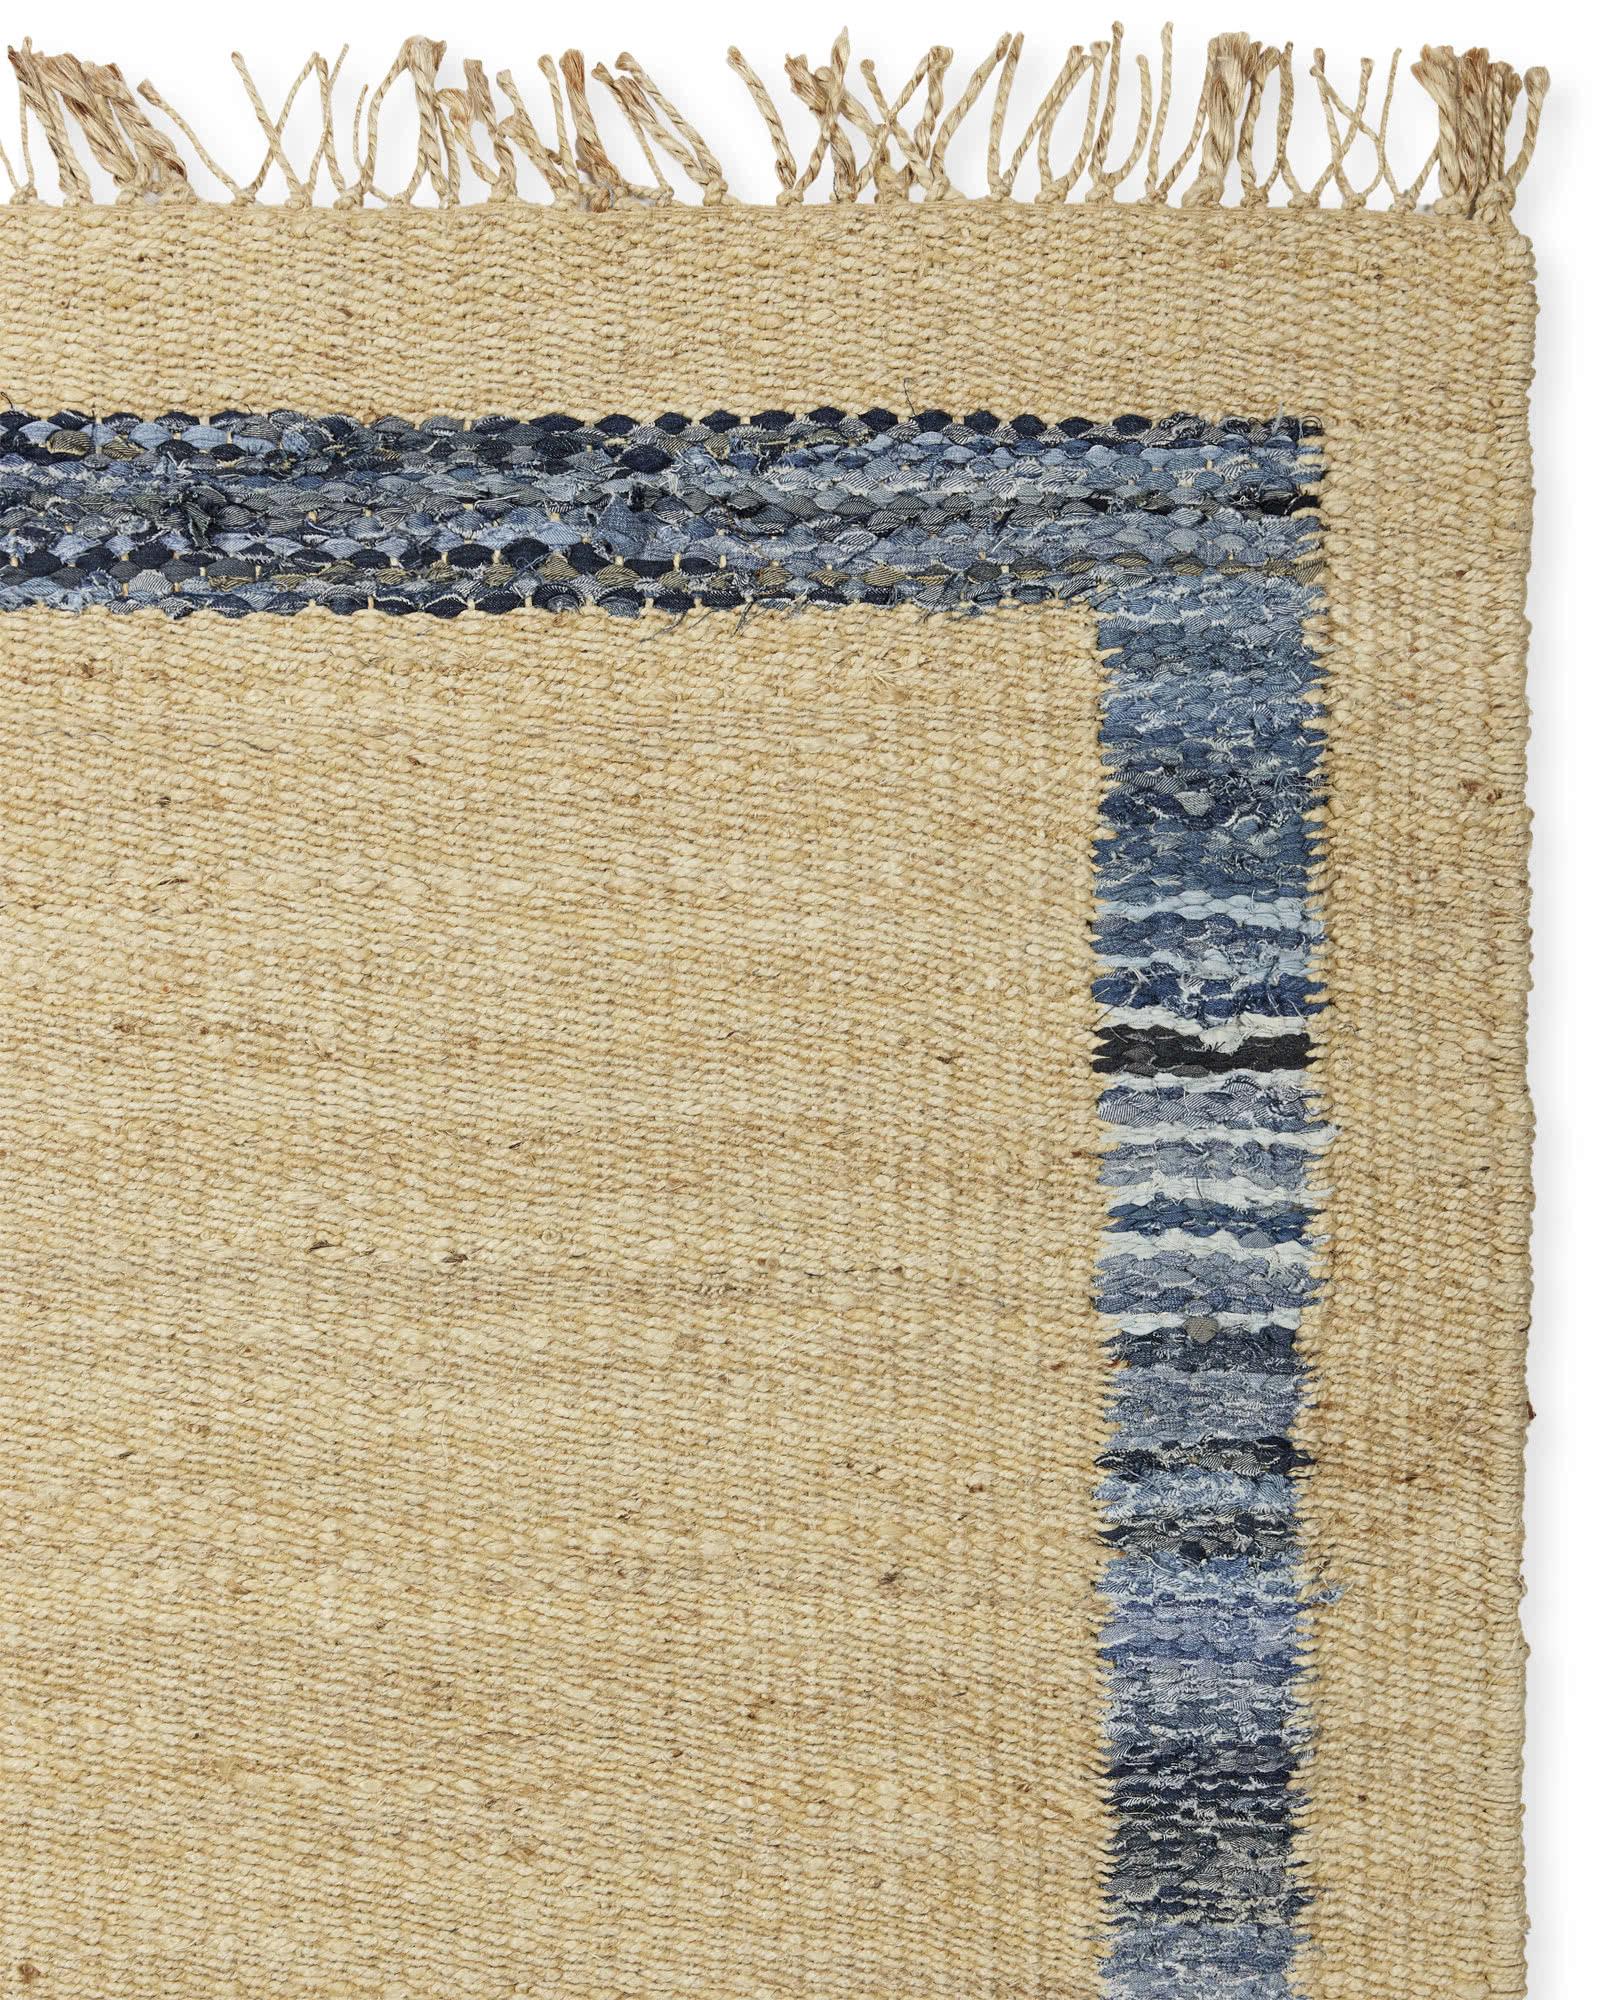 Wholesale Round Jute and Recycle Denim Rug - 150 cm - Ancient Wisdom  Giftware Supplier